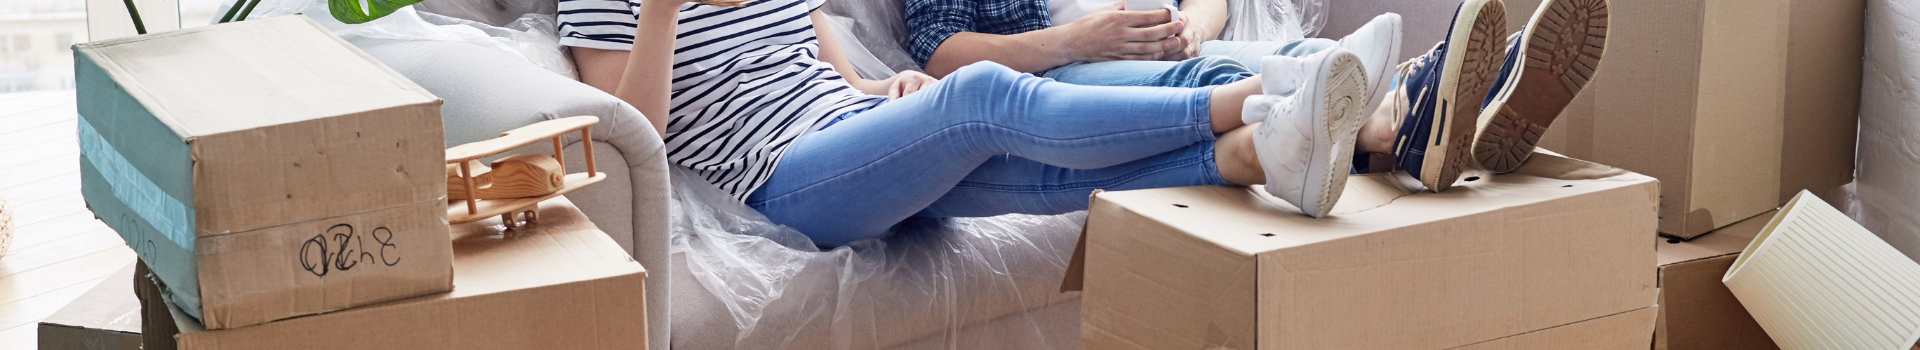 moving boxes, two people sitting couch with feet on box